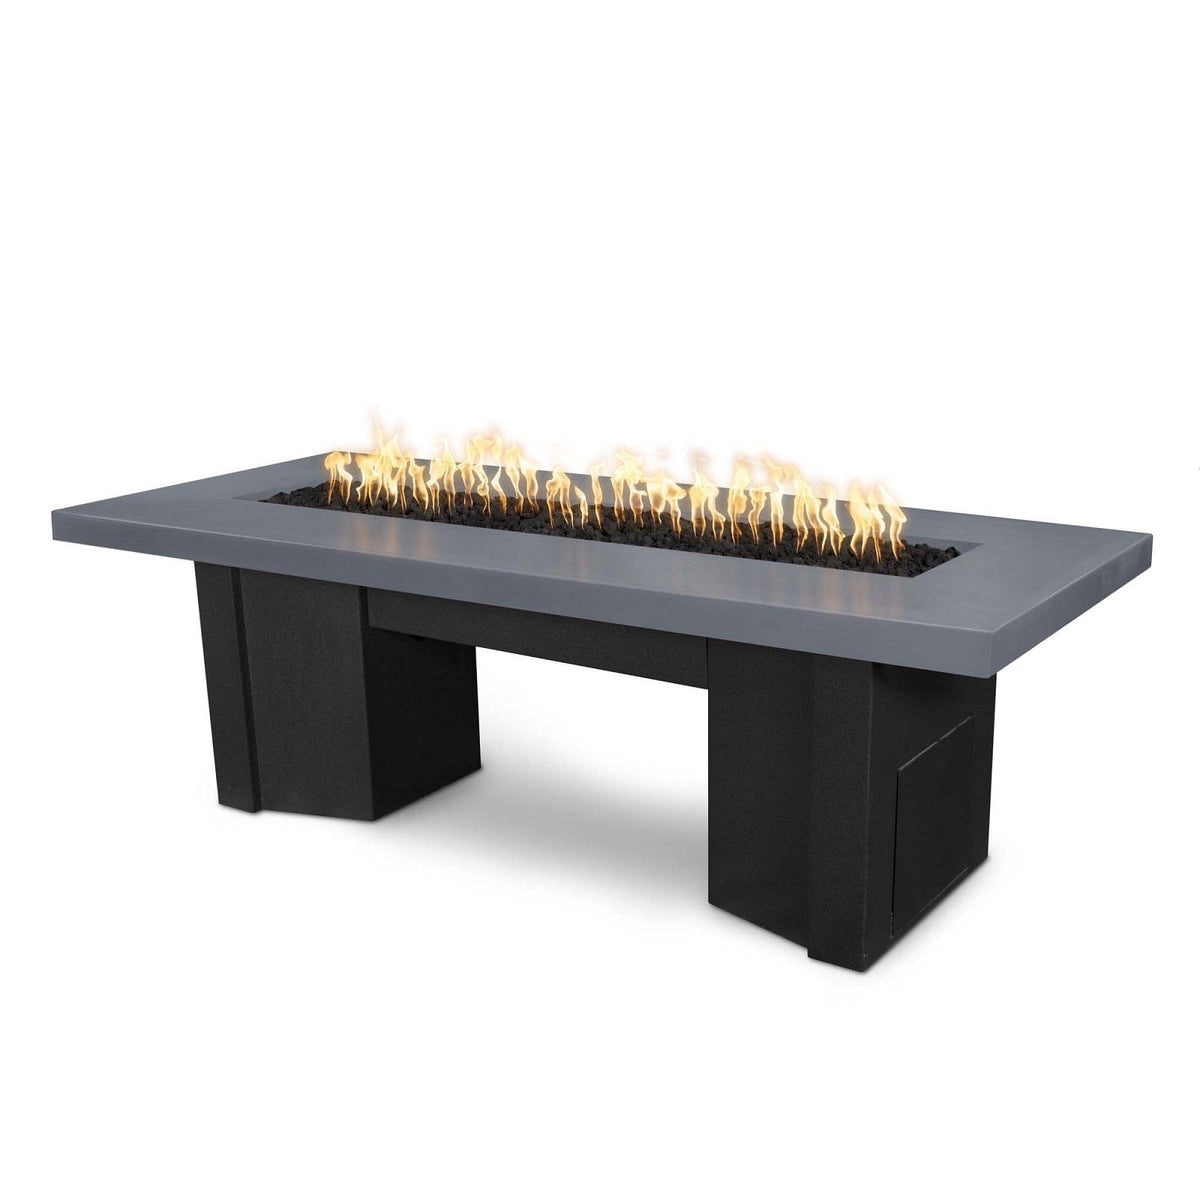 The Outdoor Plus Fire Features Gray (-GRY) / Black Powder Coated Steel (-BLK) The Outdoor Plus 60&quot; Alameda Fire Table Smooth Concrete in Liquid Propane - Match Lit with Flame Sense System / OPT-ALMGFRC60FSML-LP